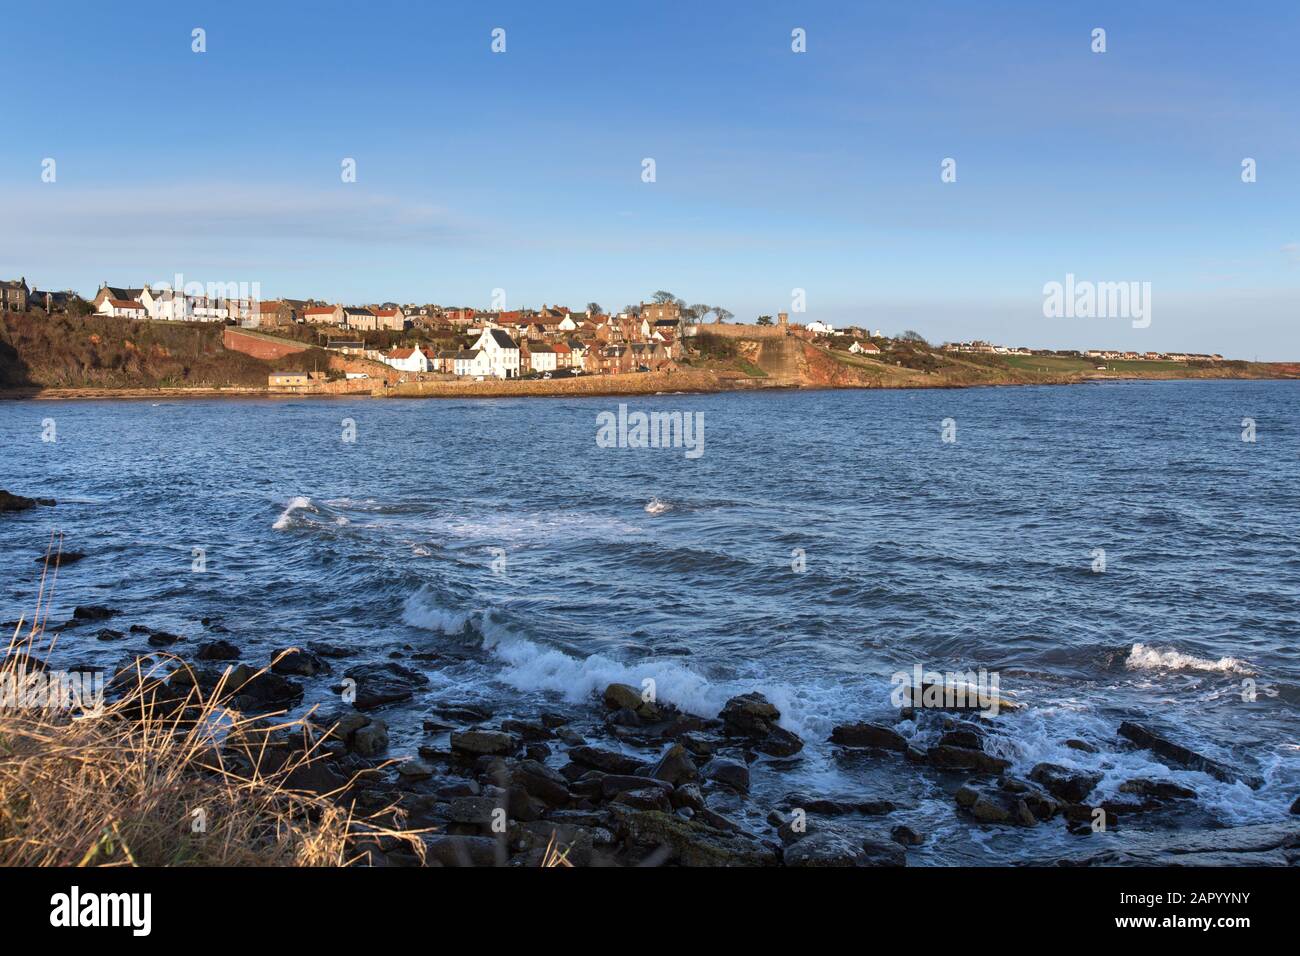 Fife Coastal Path, Scotland. Picturesque view of the Fife Coastal Path between the villages of Anstruther and Crail. Stock Photo